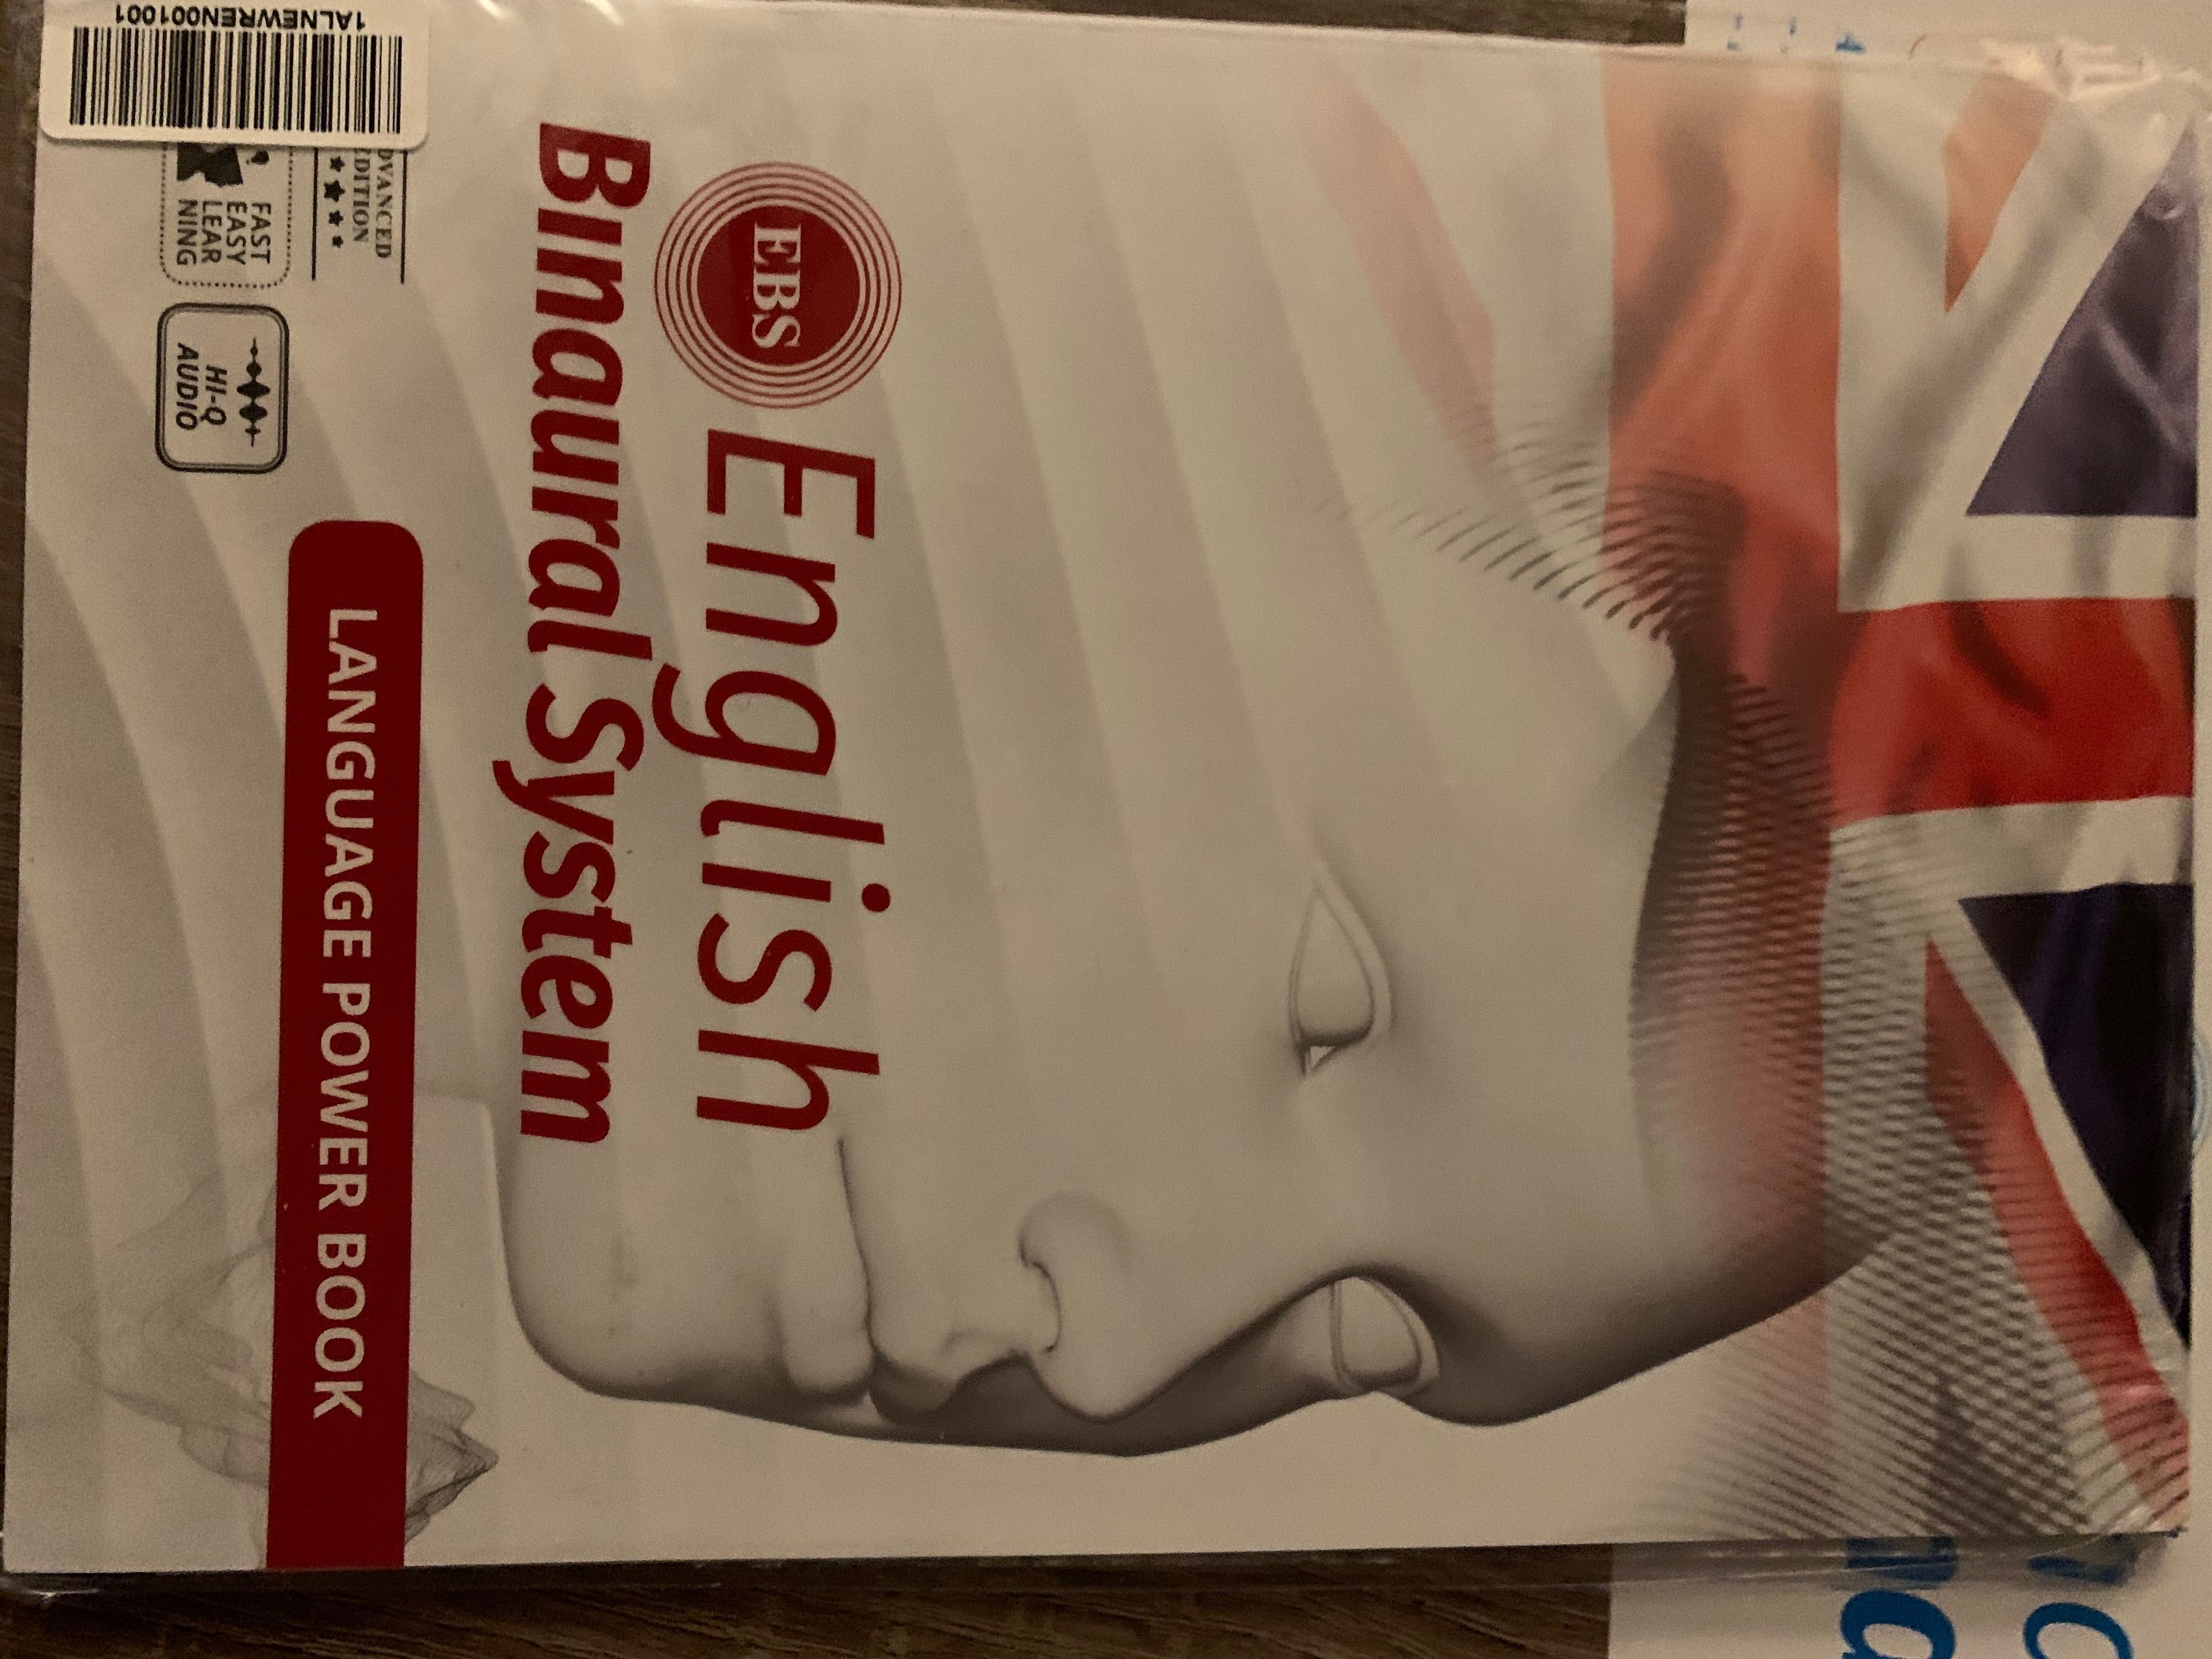 English Binaural System EBS 3 disks fast easy learning